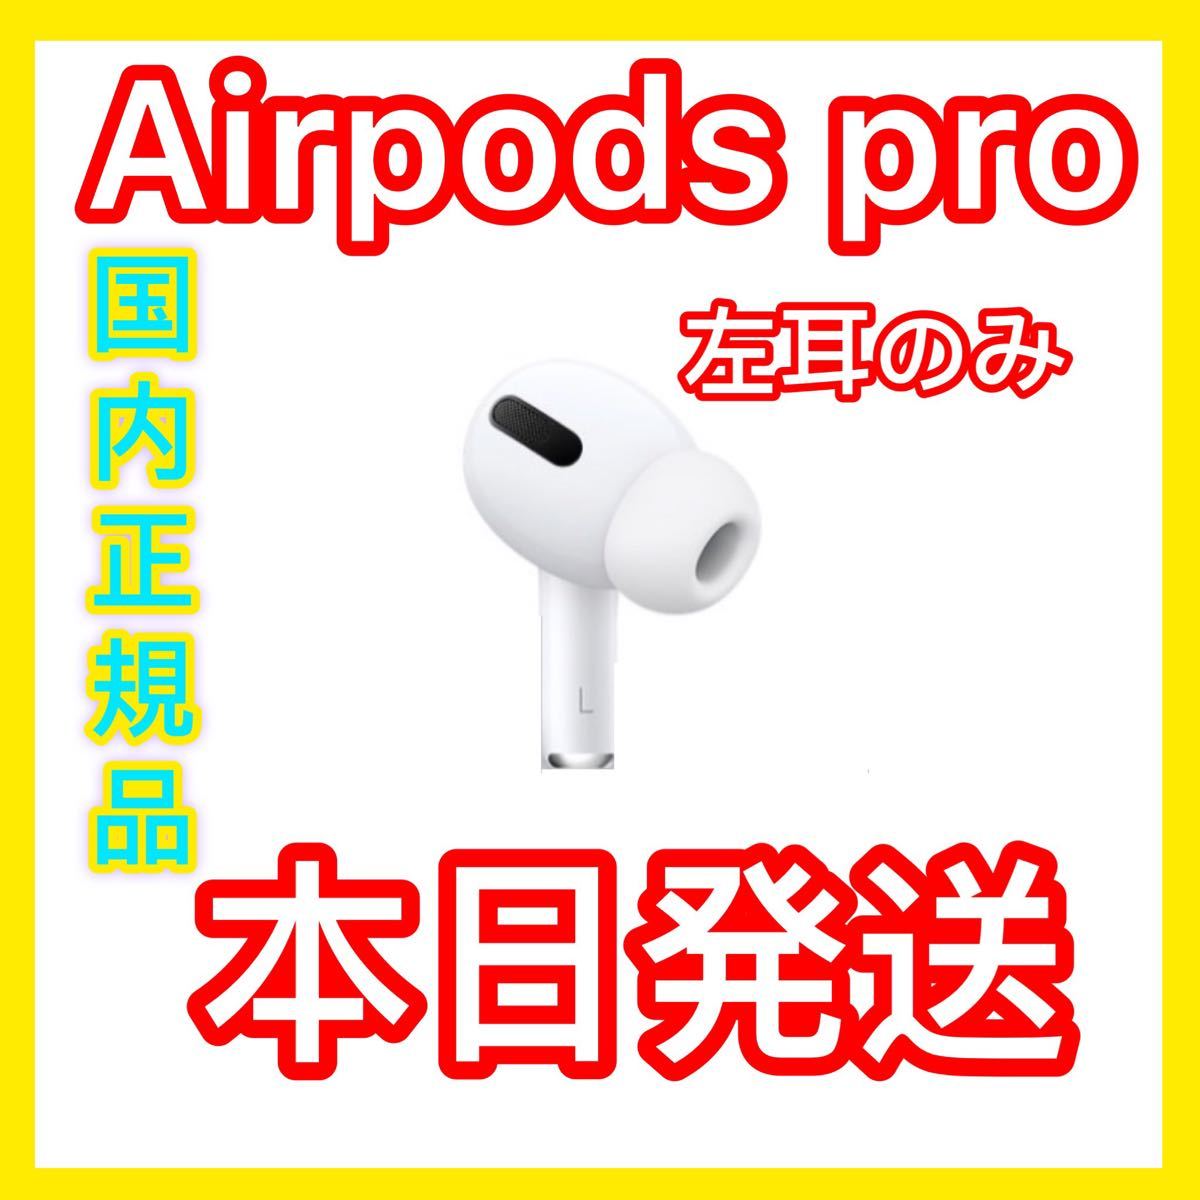 NEW限定品】 エアーポッズ 第２世代AirPods 第二世代エアポッズ 左耳のみ Apple